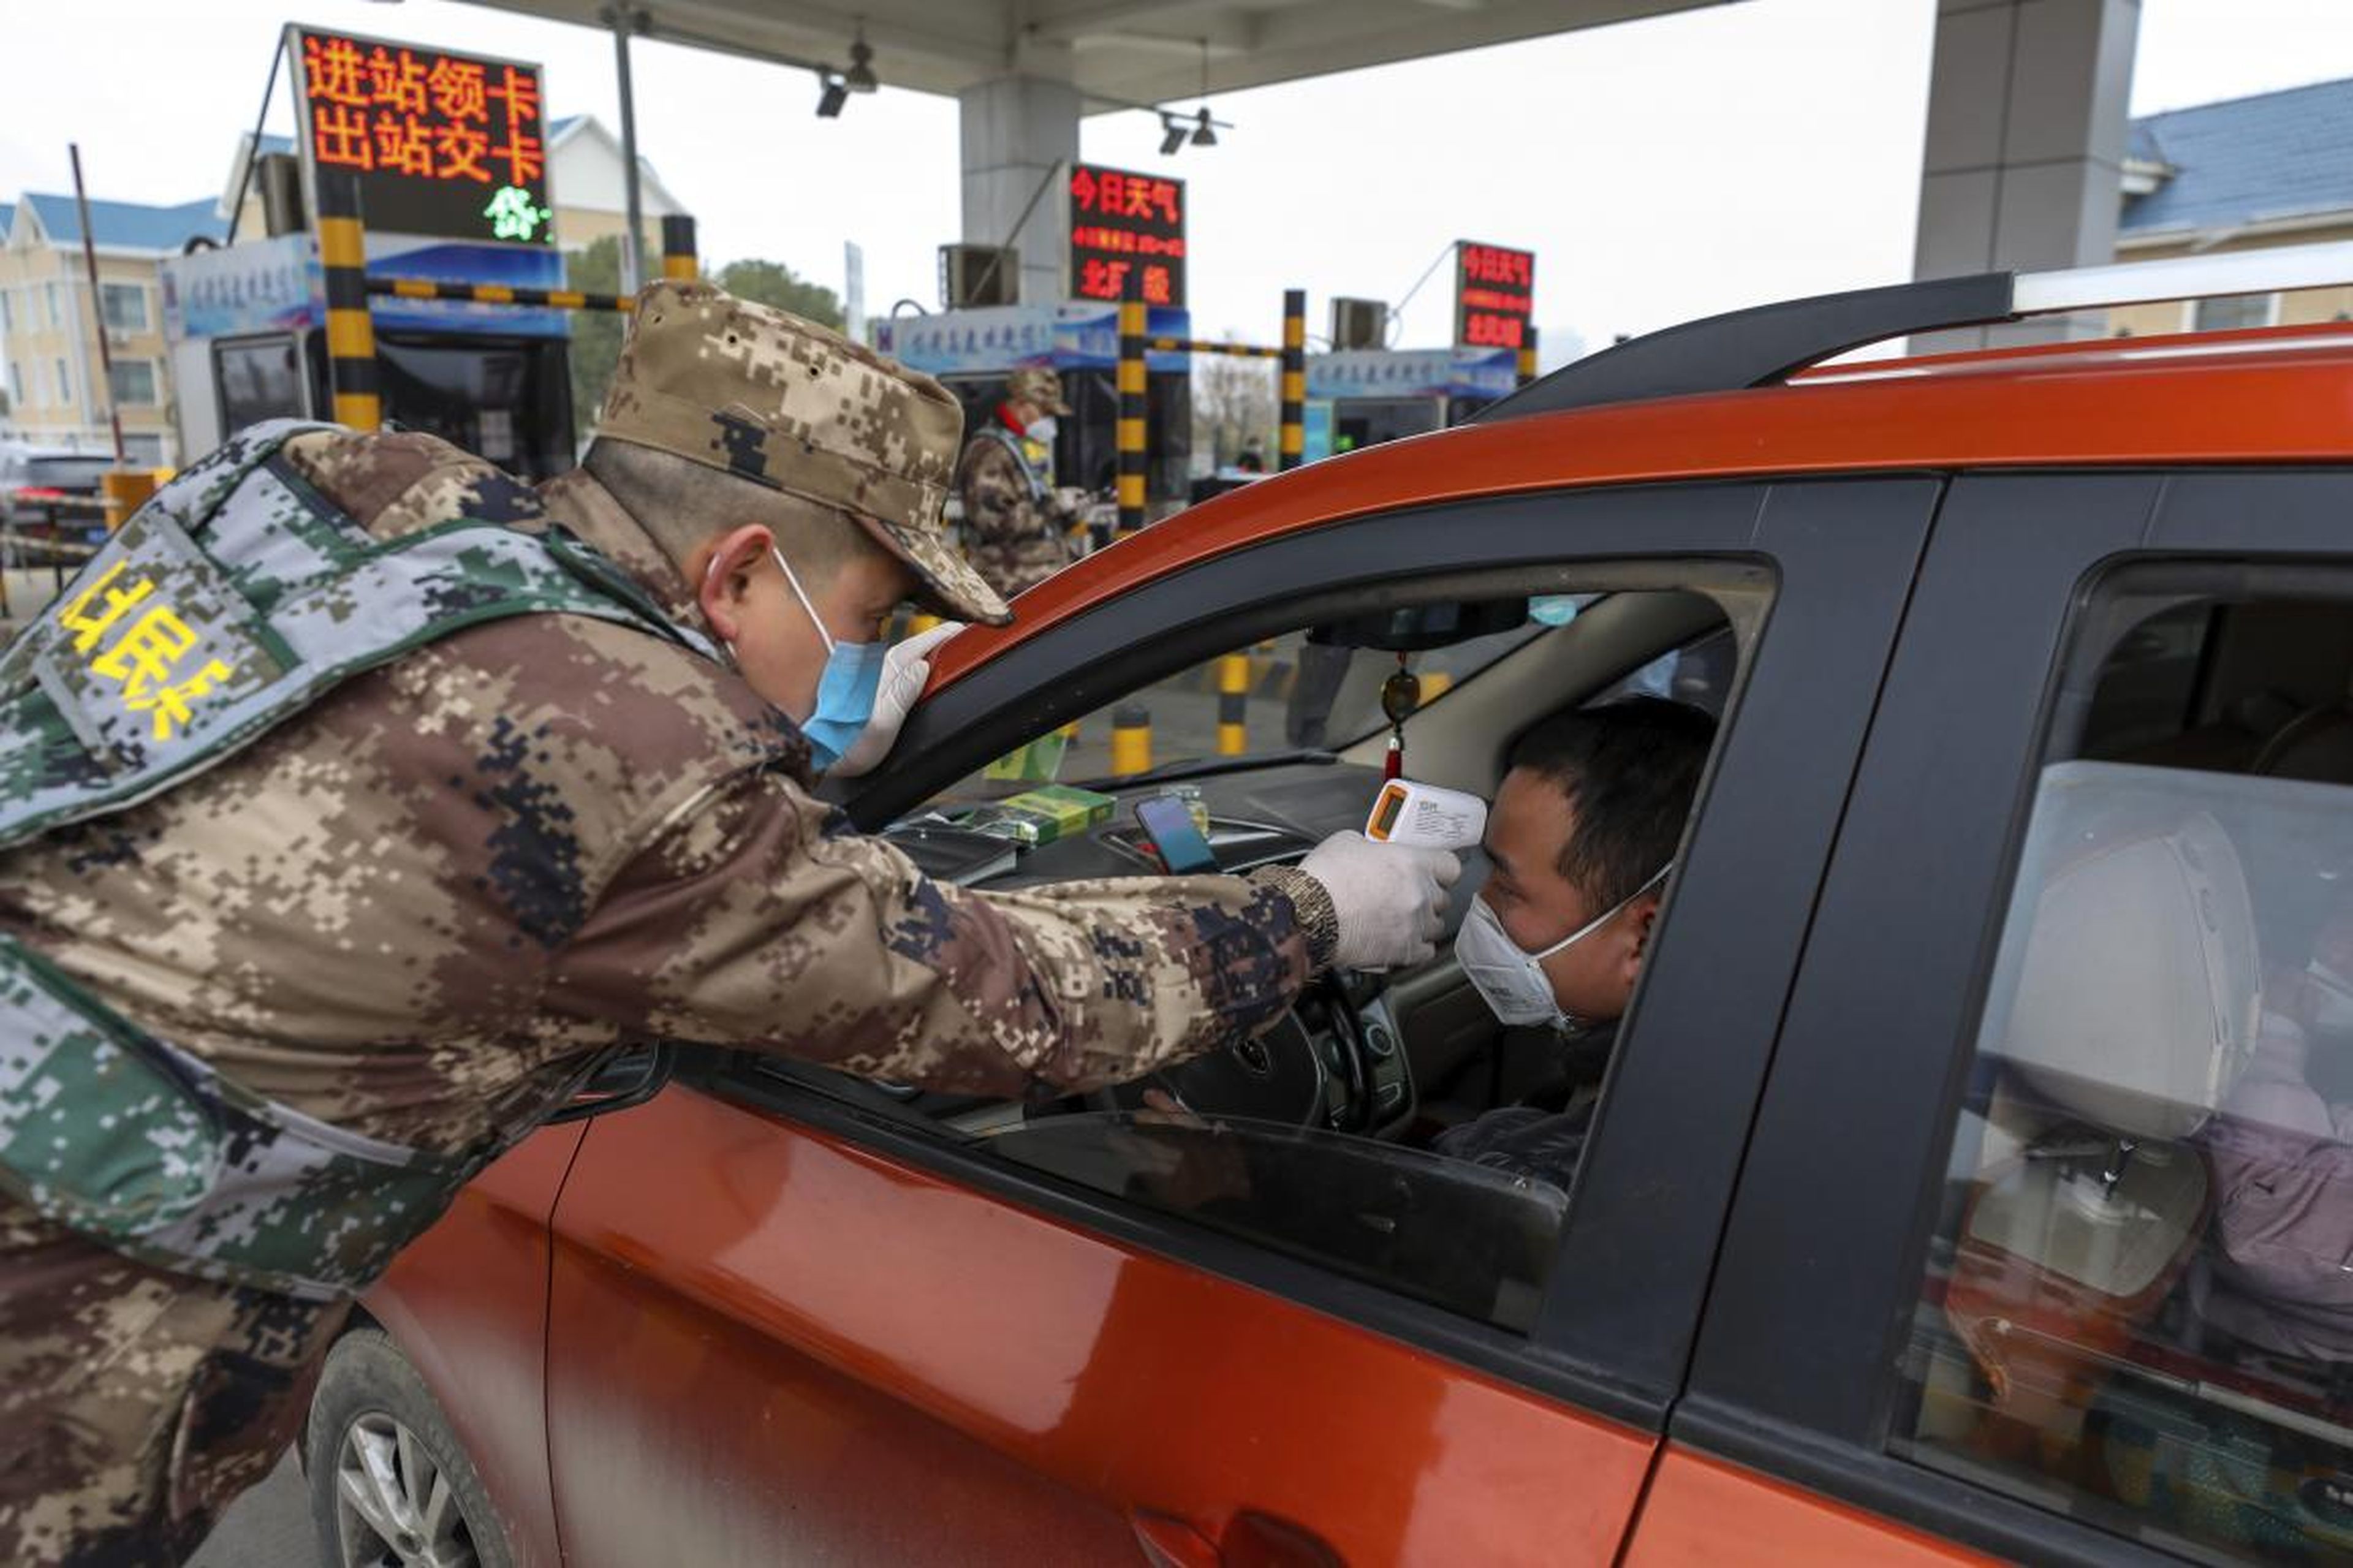 A militia member uses a digital thermometer to take a driver's temperature at a checkpoint at a highway toll gate in Wuhan, China, January 23, 2020.